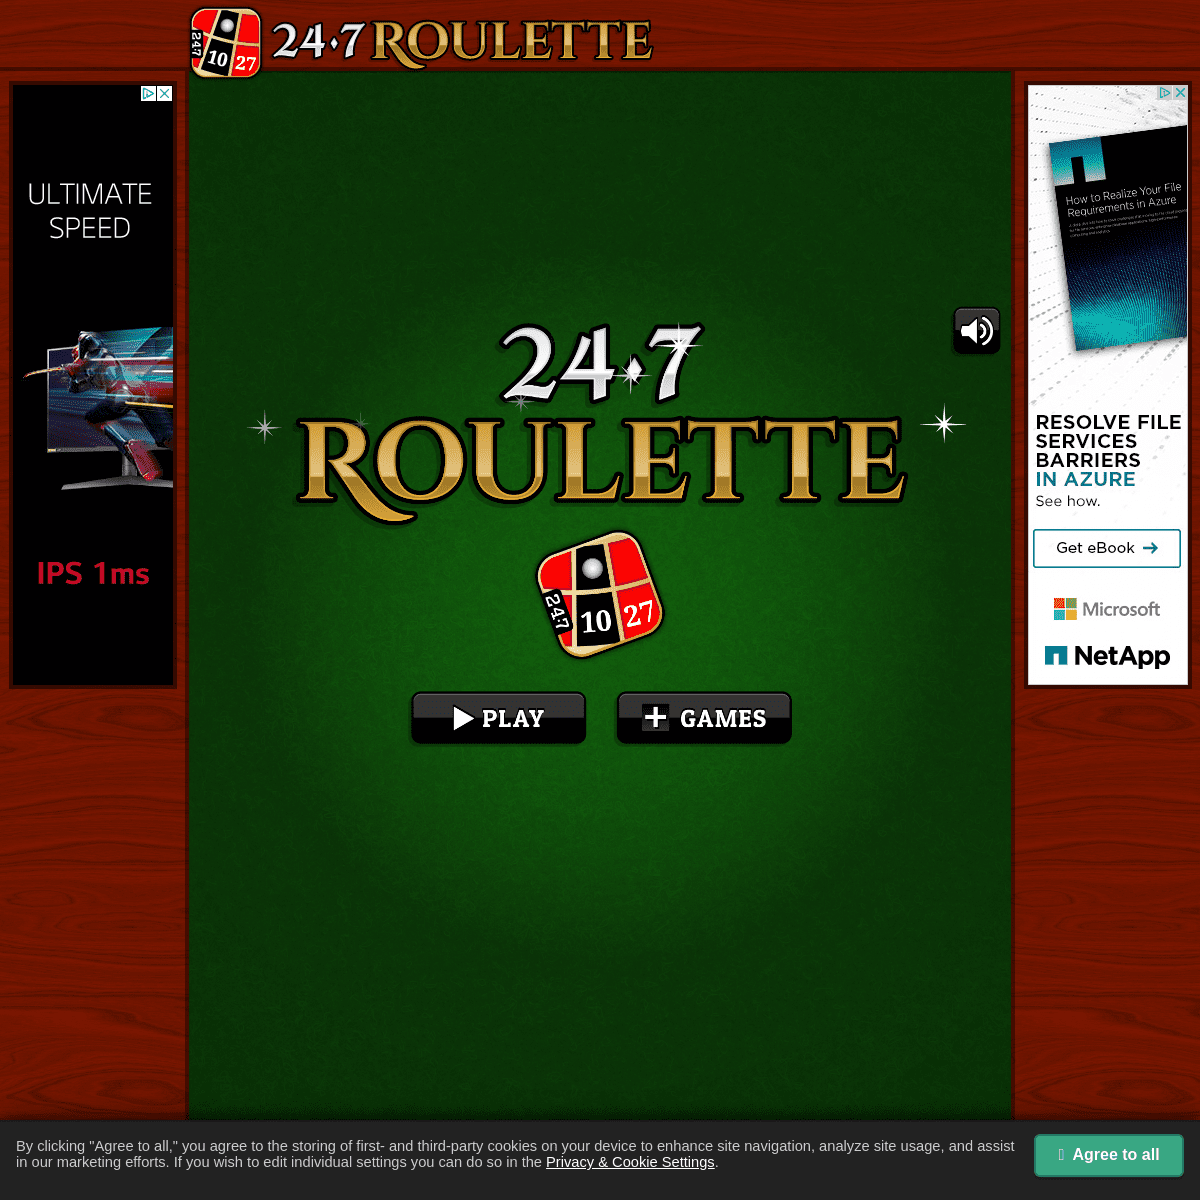 A complete backup of 247roulette.org